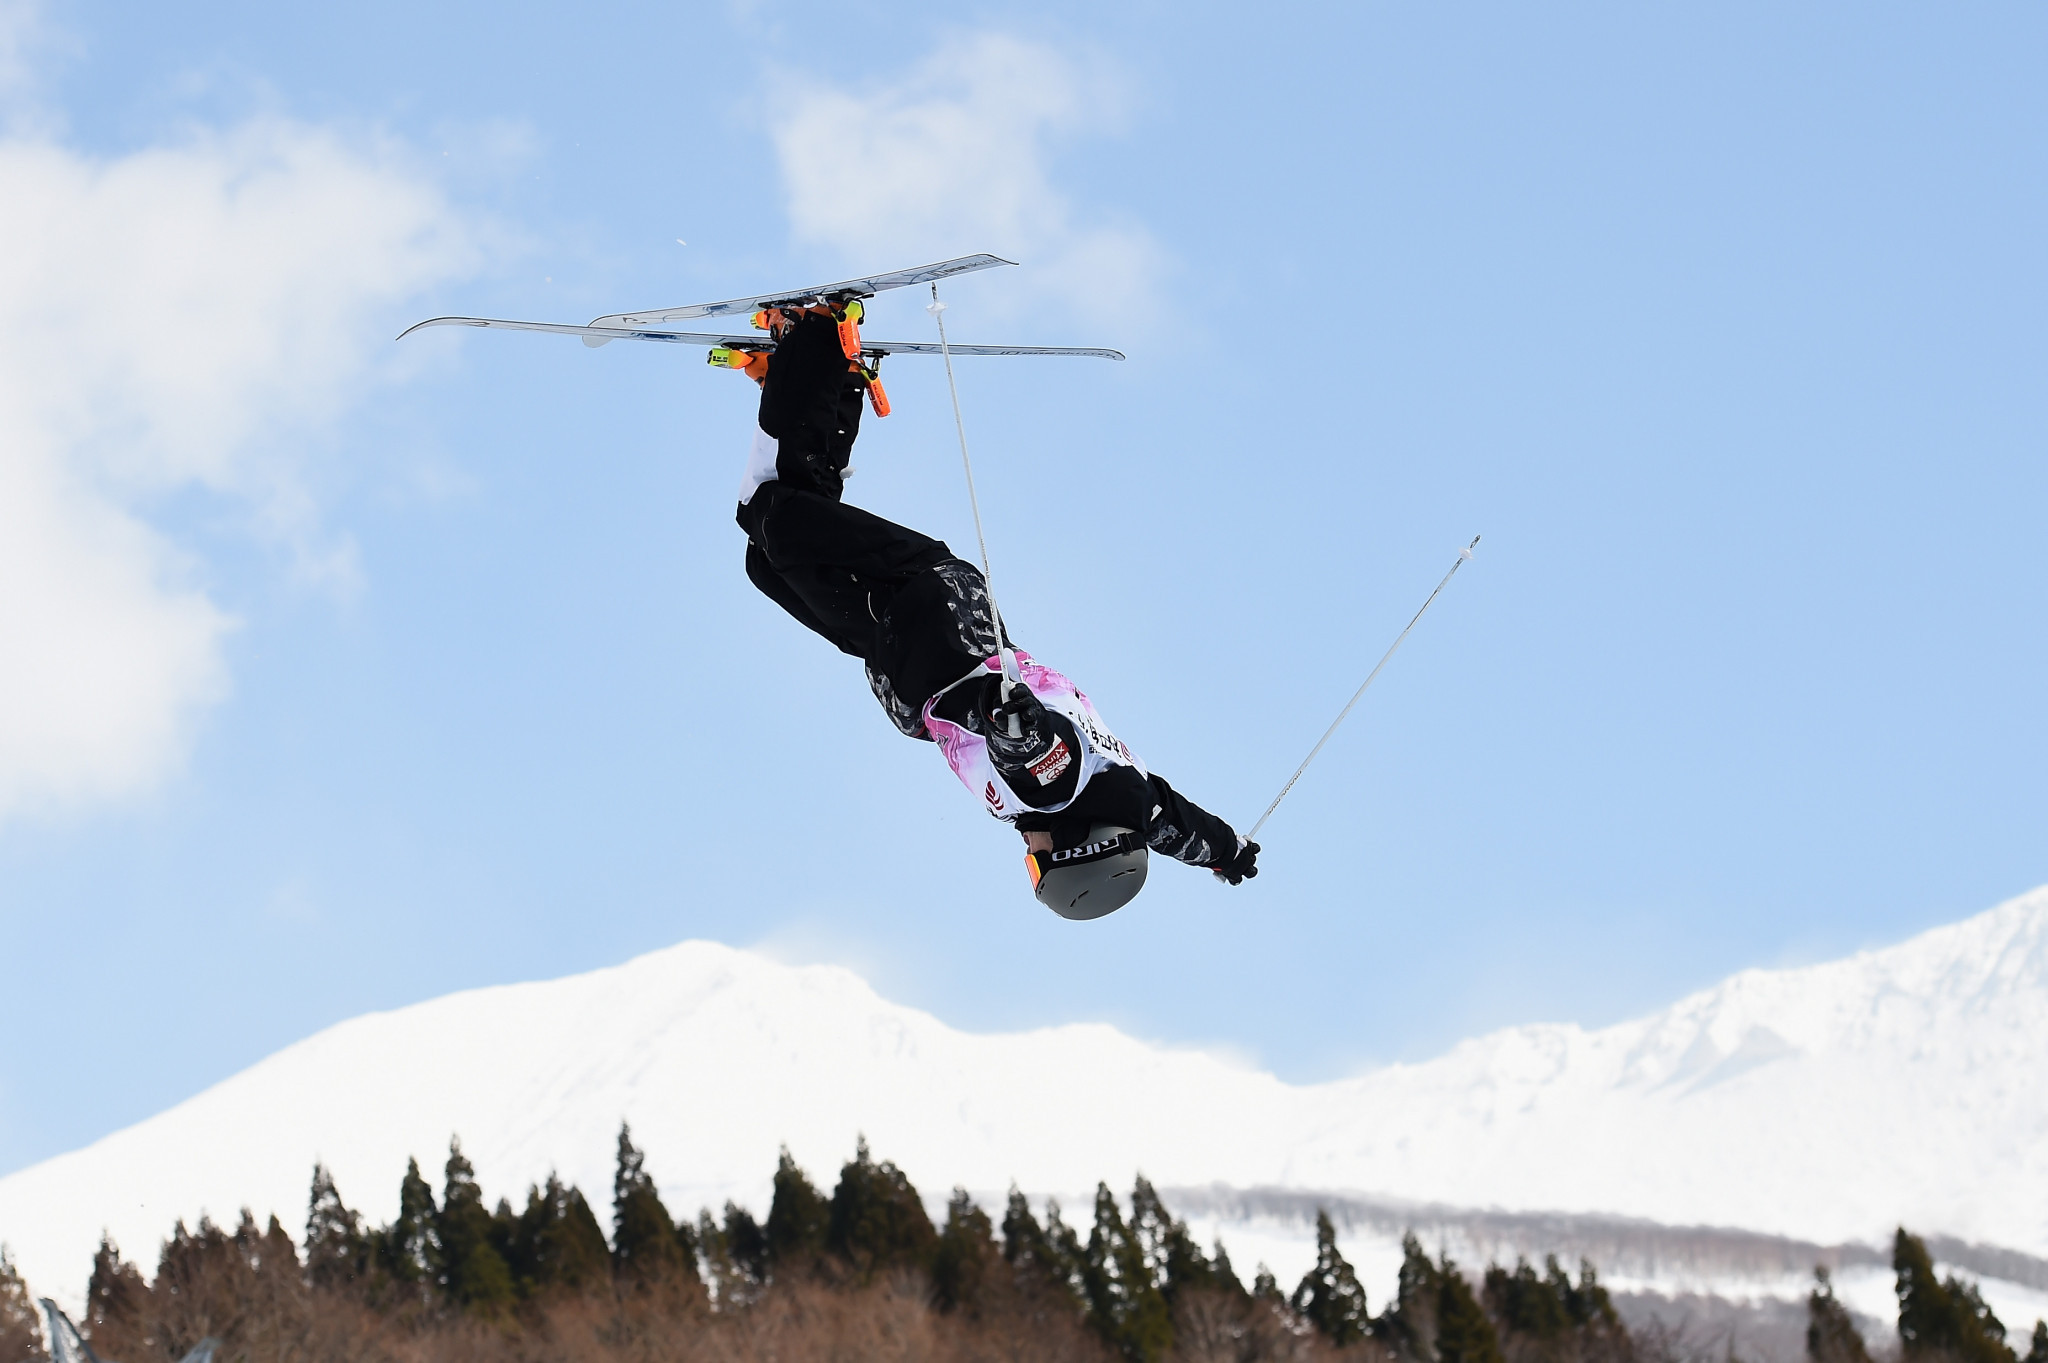 US Ski and Snowboard reveal athletes nominated on moguls and aerials squads for next season